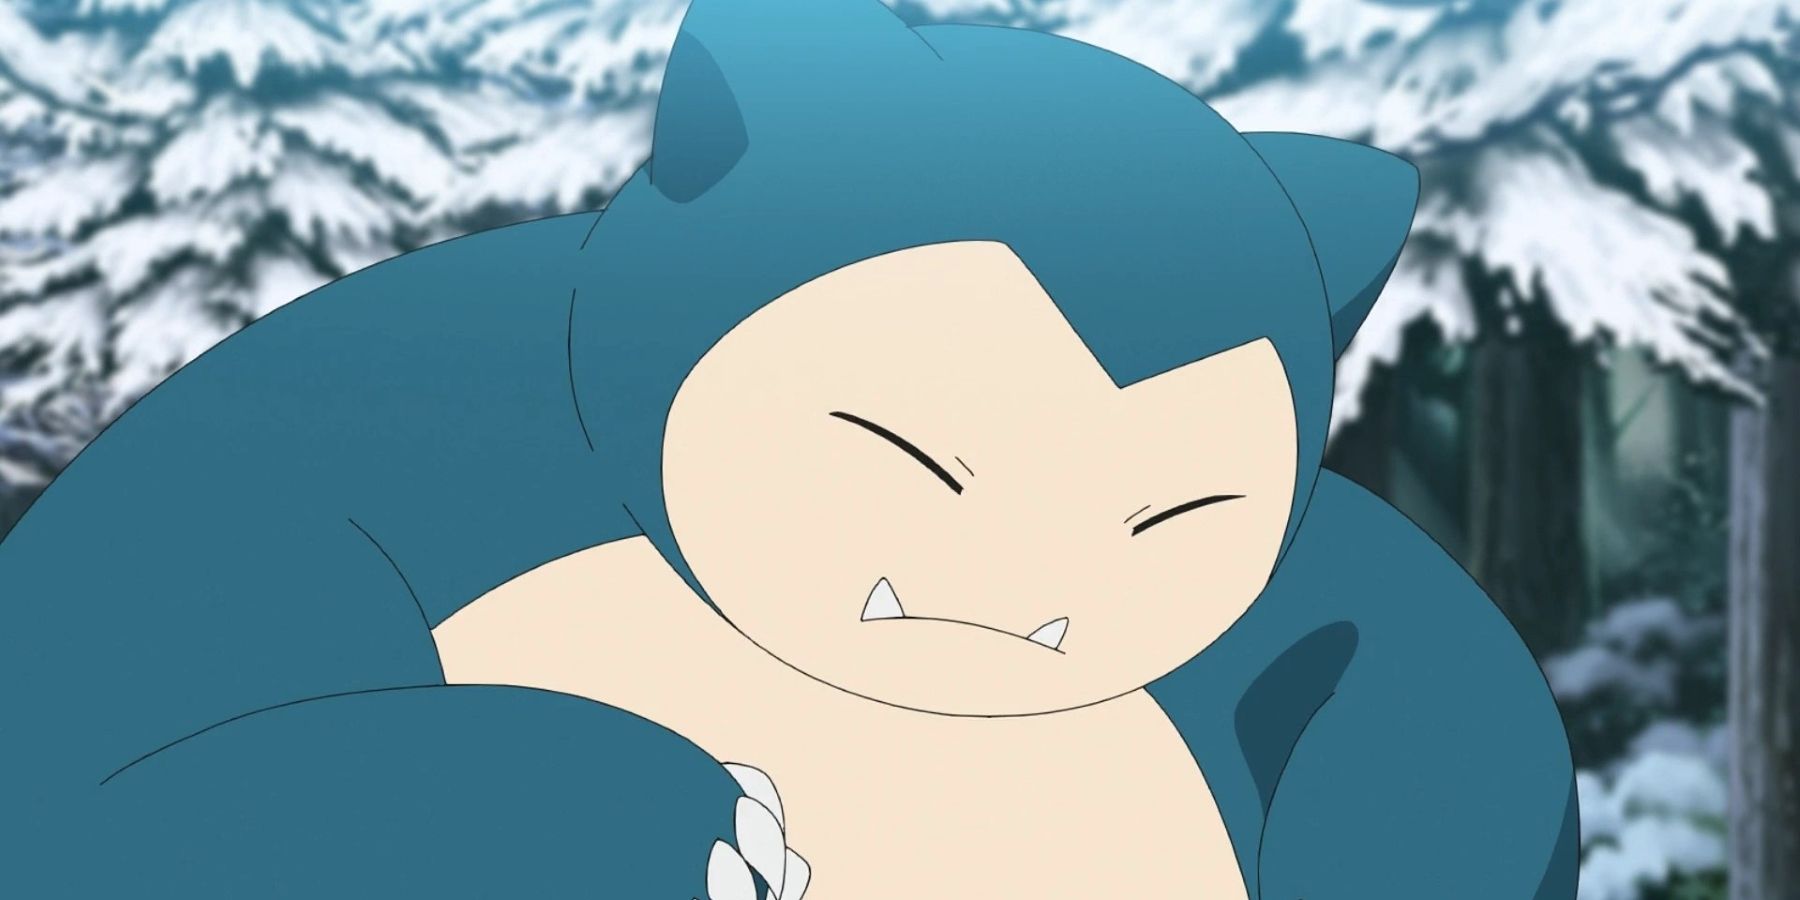 Snorlax sits in a snow-covered forest